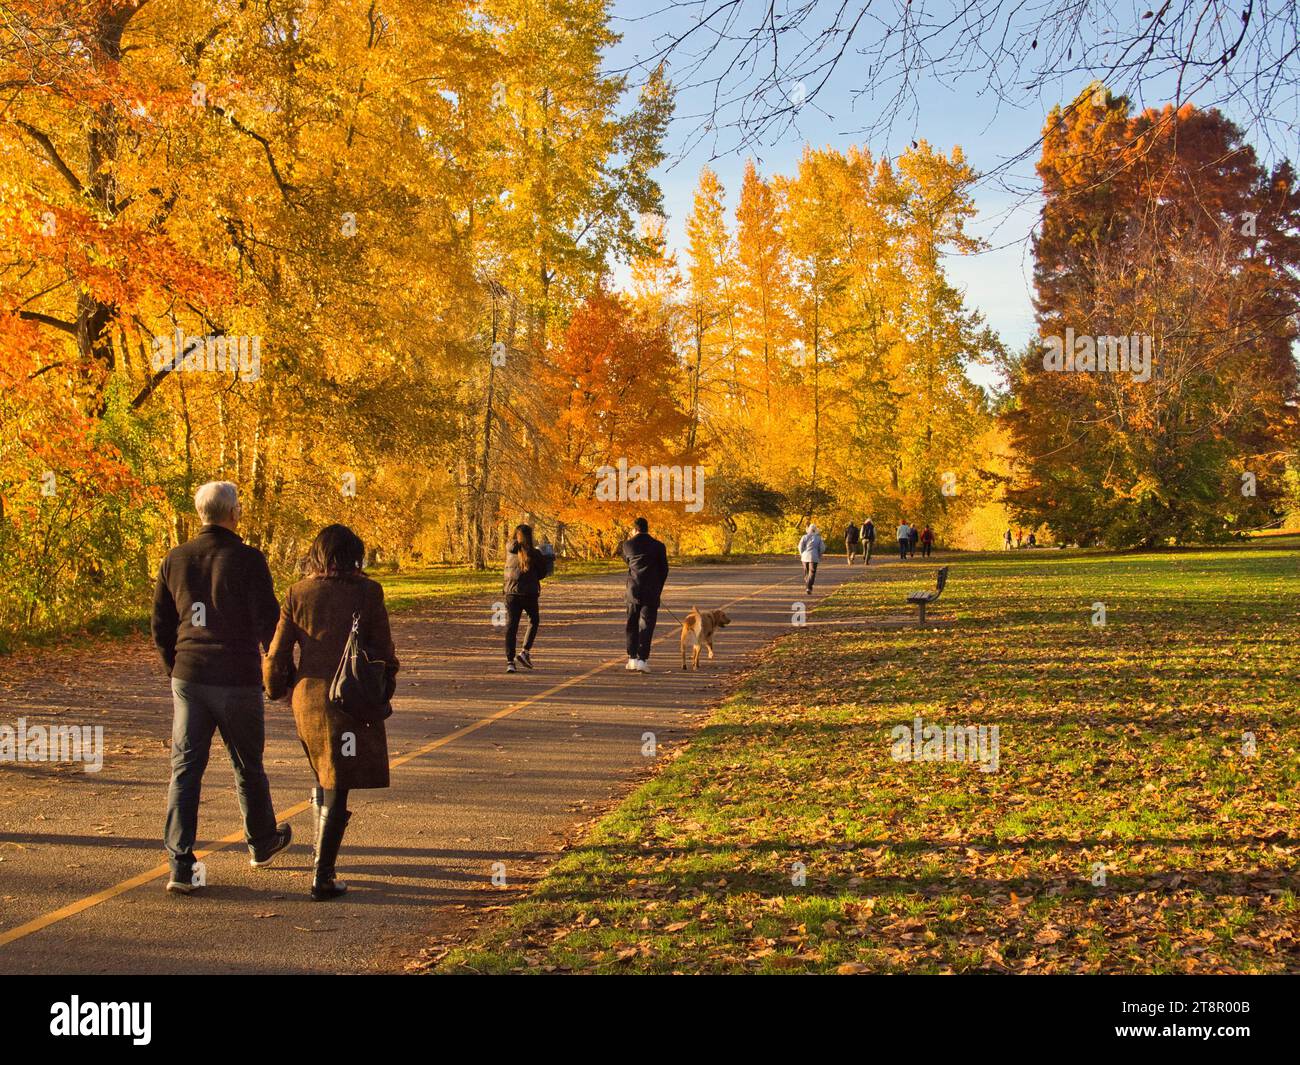 Walking path with passing figures going for a stroll on a beautiful sunny day in a city park with yellow and orange foliage at golden hour. Stock Photo